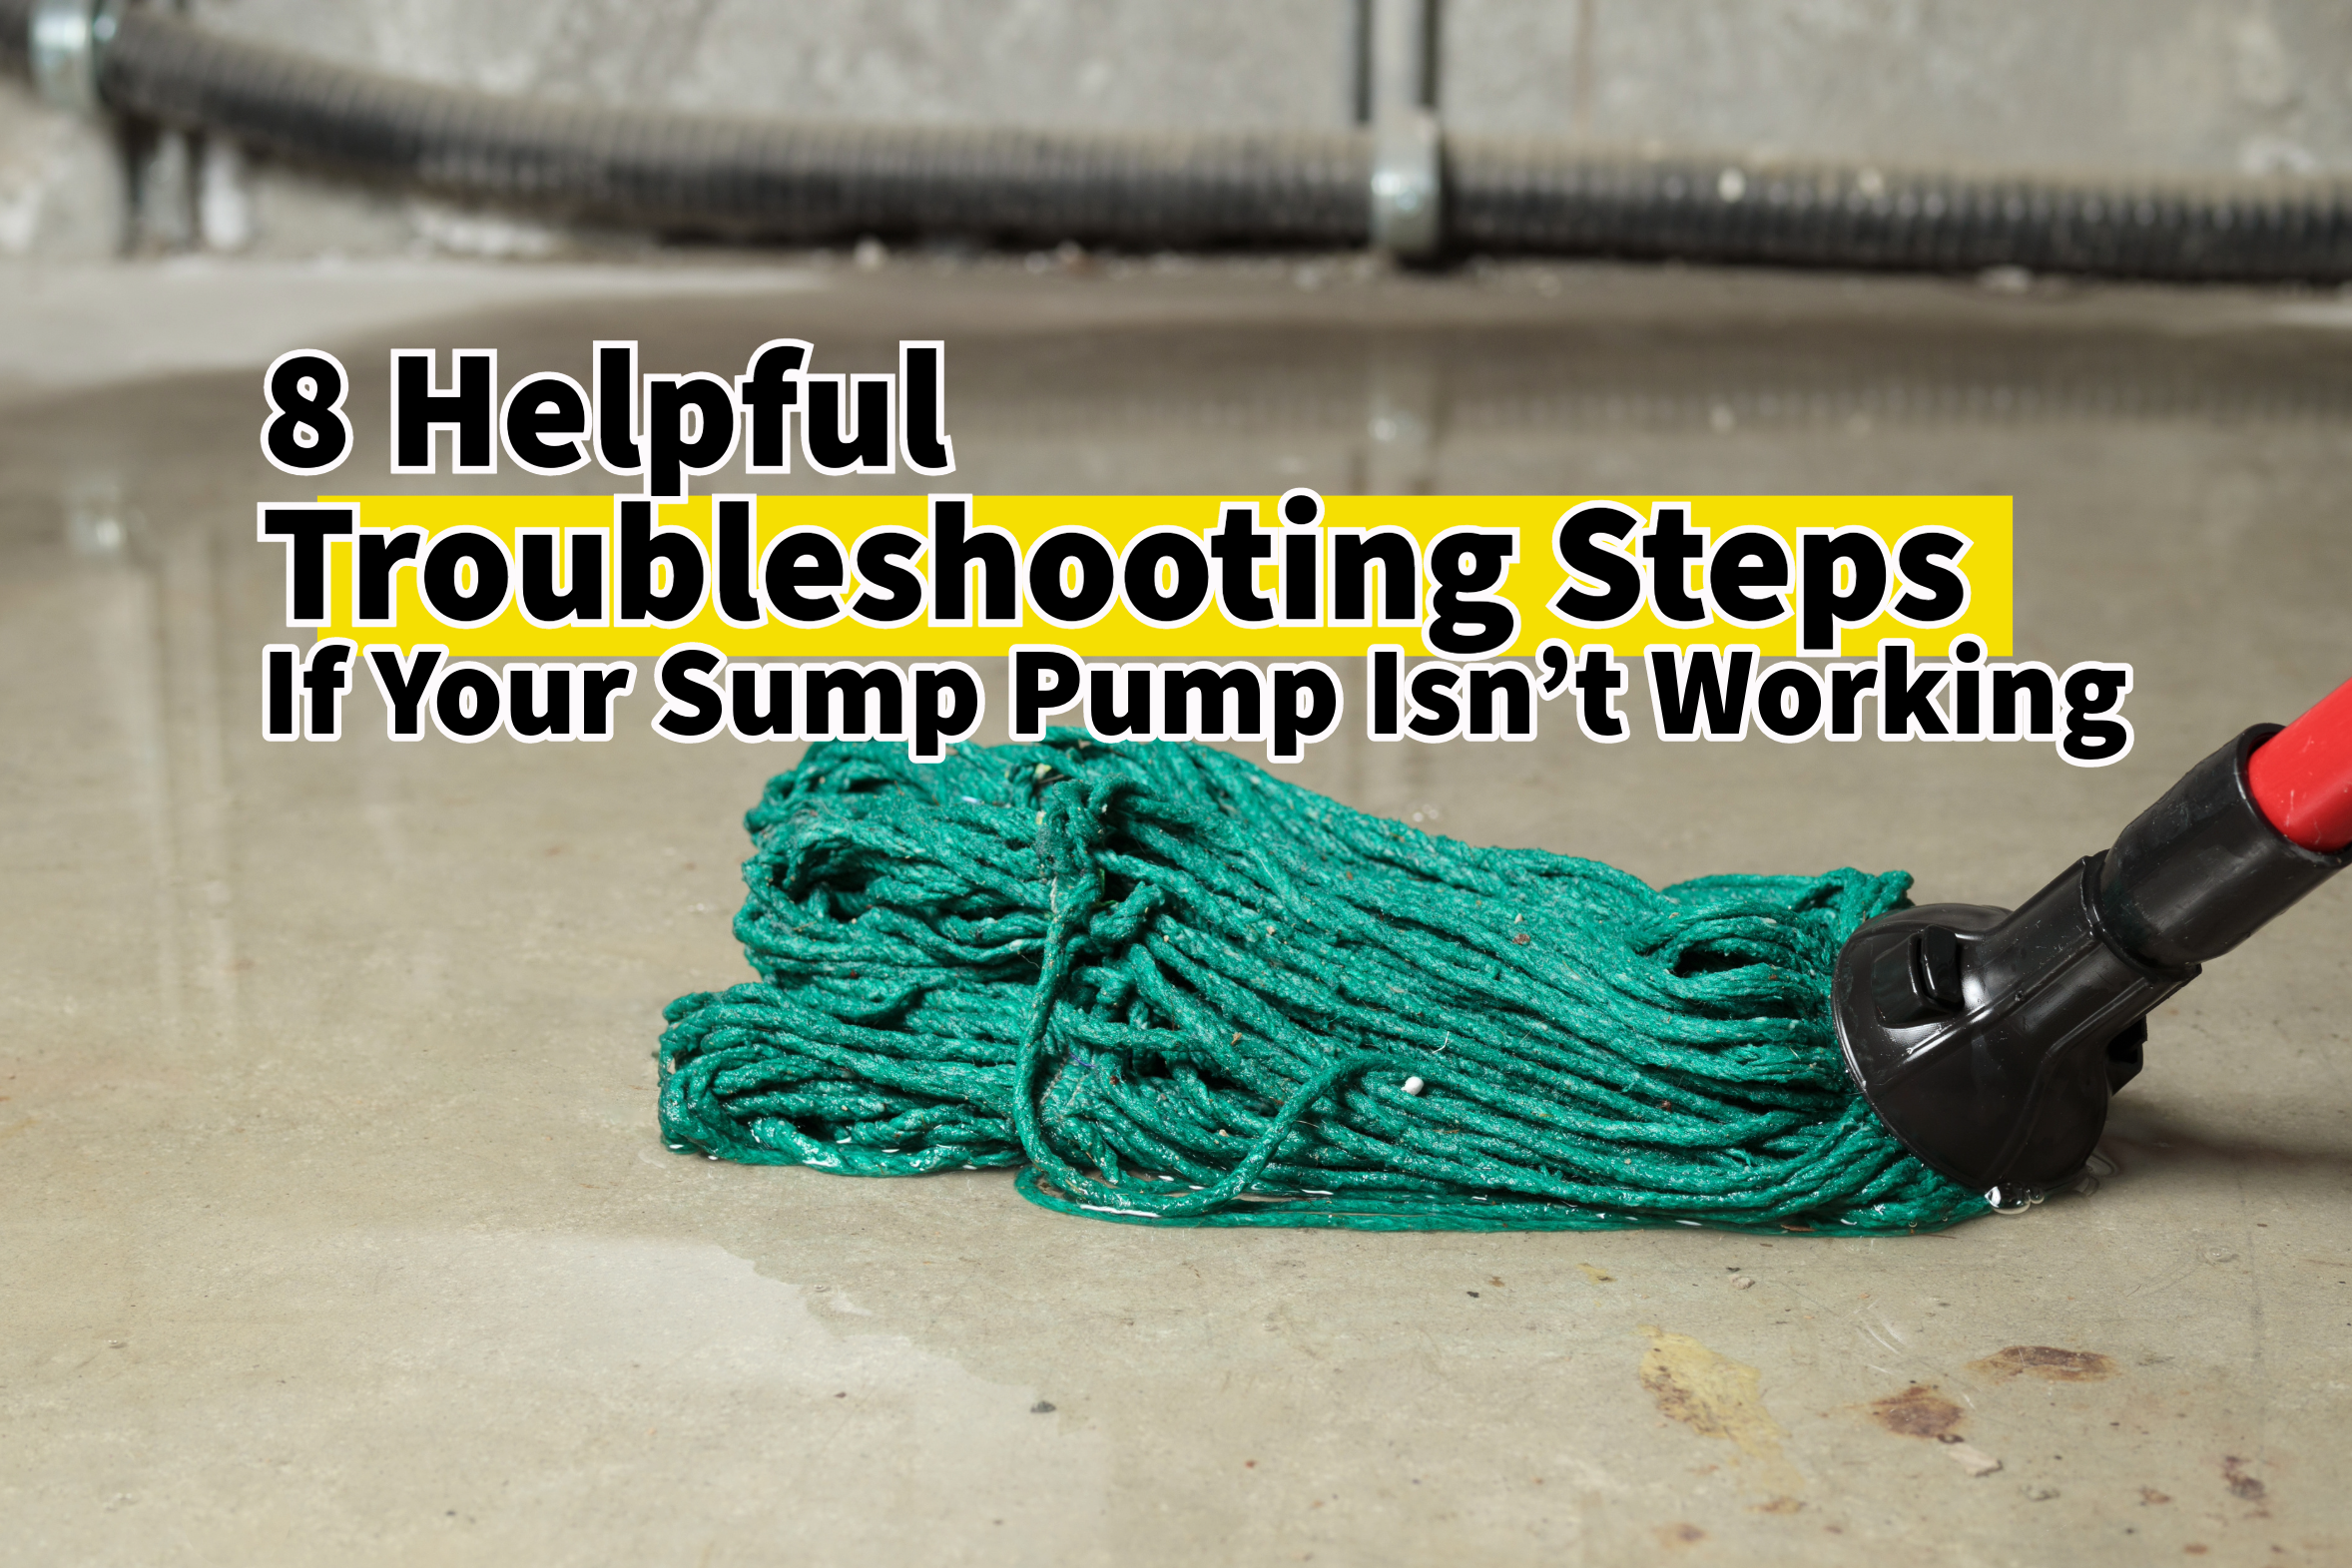 Here are some way to troubleshoot your sump pump if you are having issues.